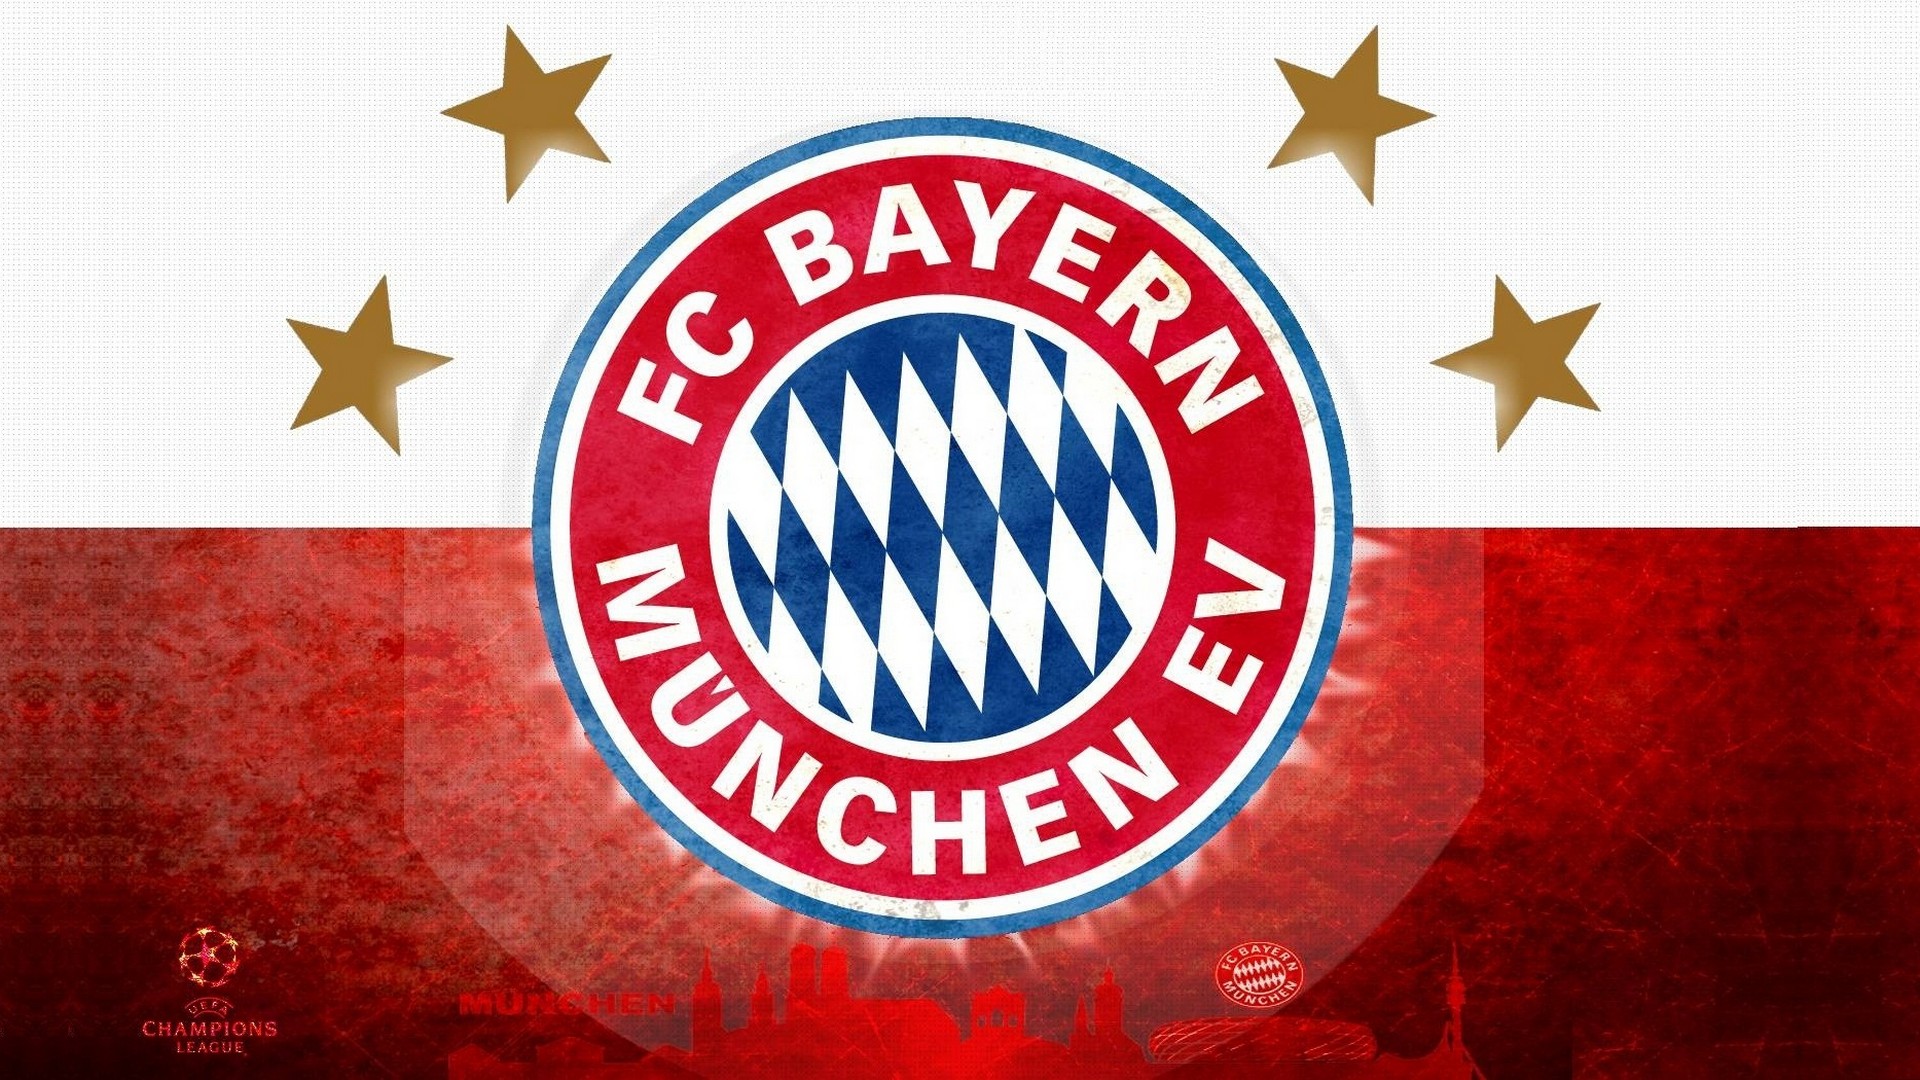 FC Bayern Munchen Wallpaper With Resolution 1920X1080 pixel. You can make this wallpaper for your Mac or Windows Desktop Background, iPhone, Android or Tablet and another Smartphone device for free